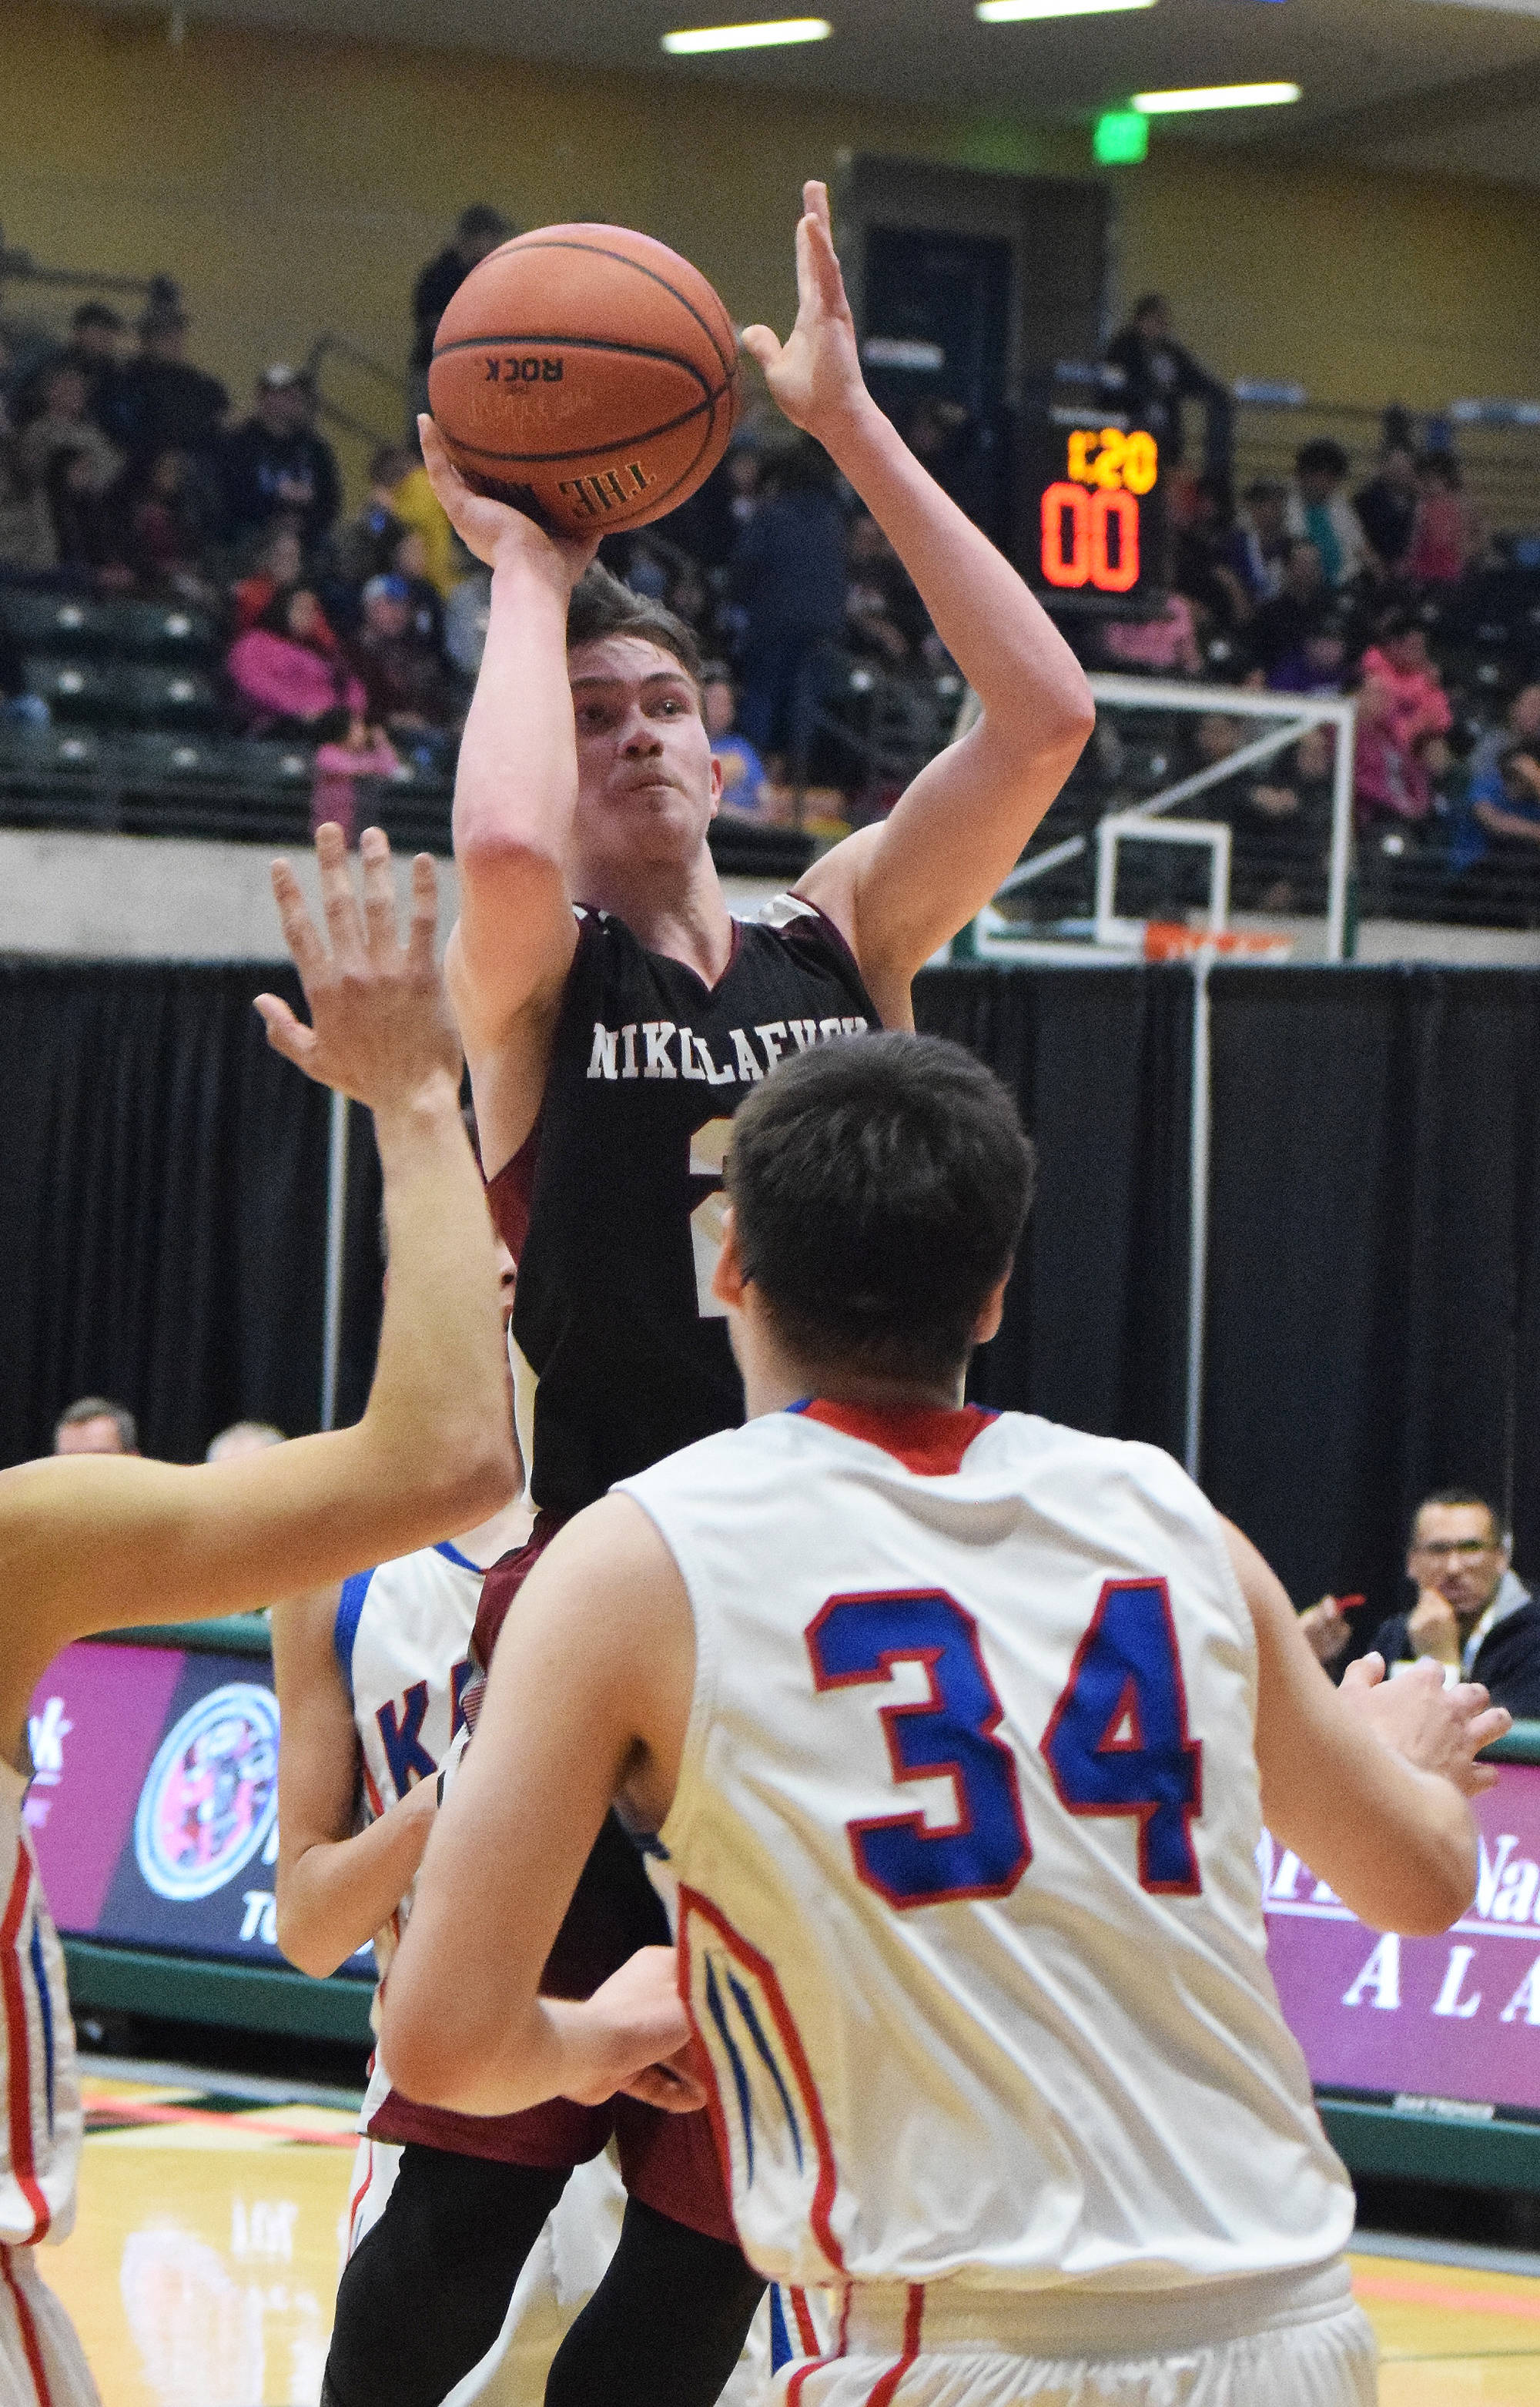 Nikolaevsk’s Kalenik Molodih eyes the rim Wednesday against the Kake Thunderbirds at the Class 1A boys state tournament at the Alaska Airlines Center in Anchorage. (Photo by Joey Klecka/Peninsula Clarion)